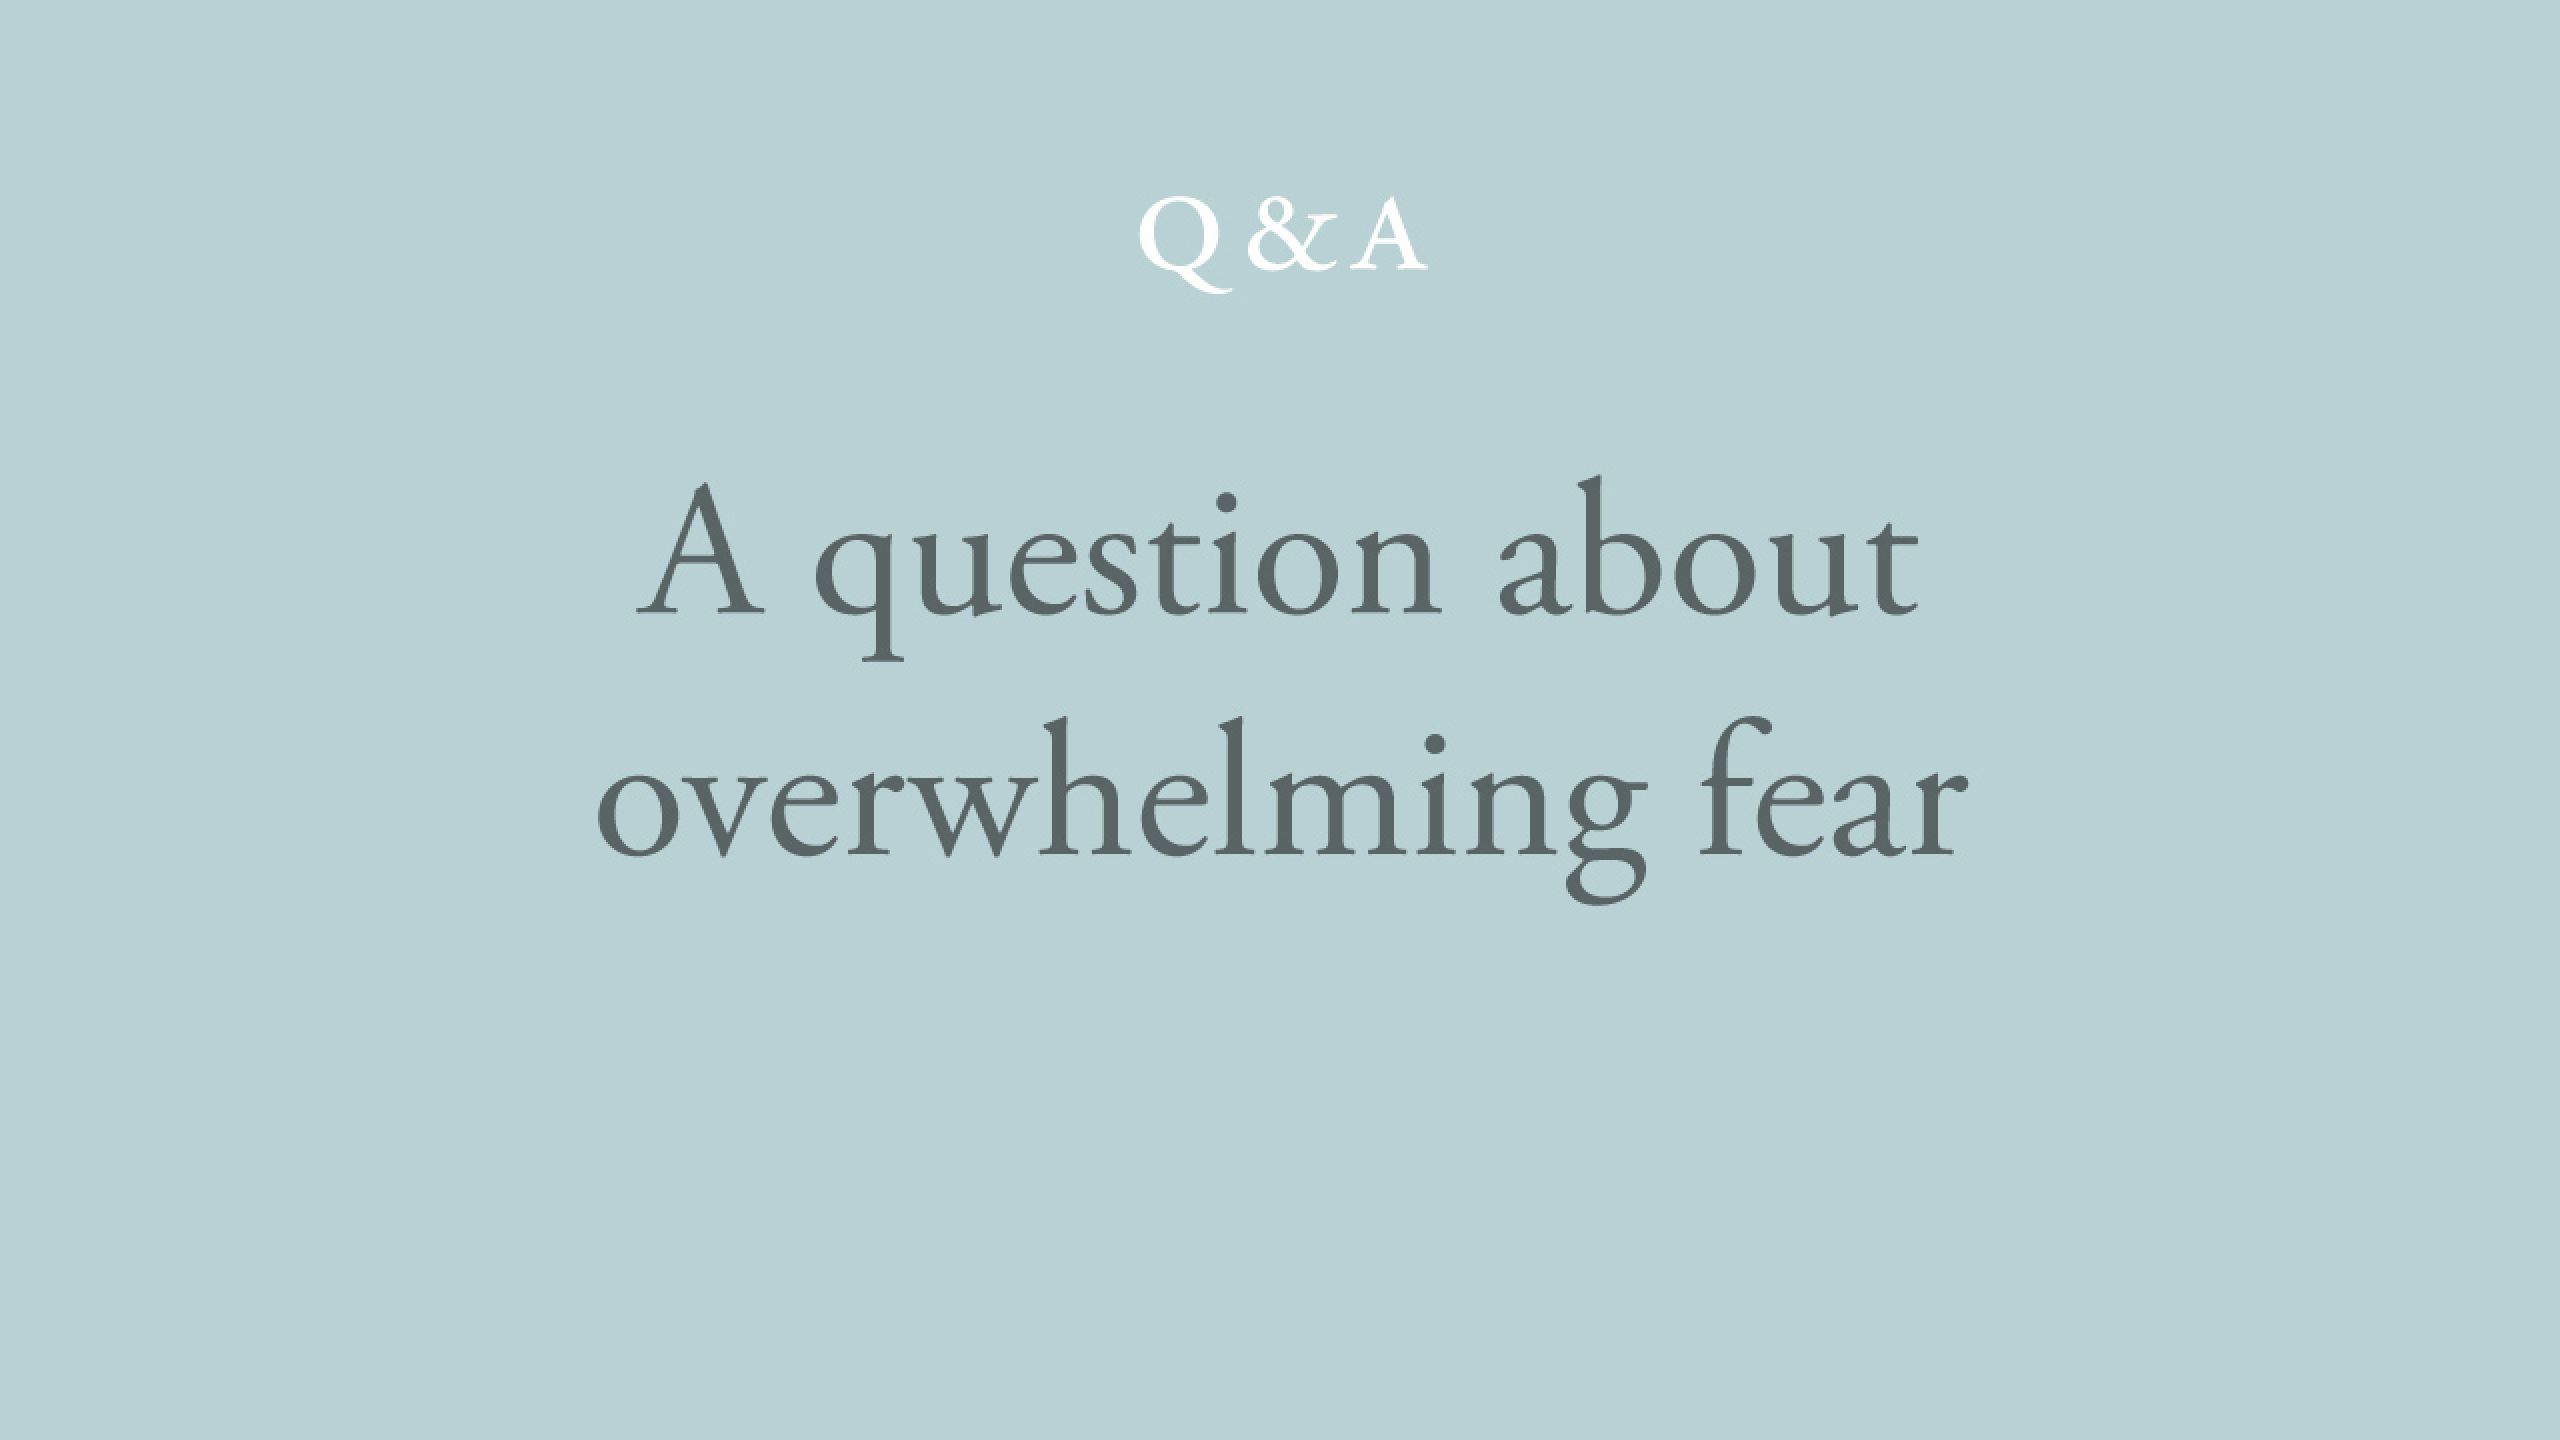 Can the non-dual teaching cause overwelming fear?